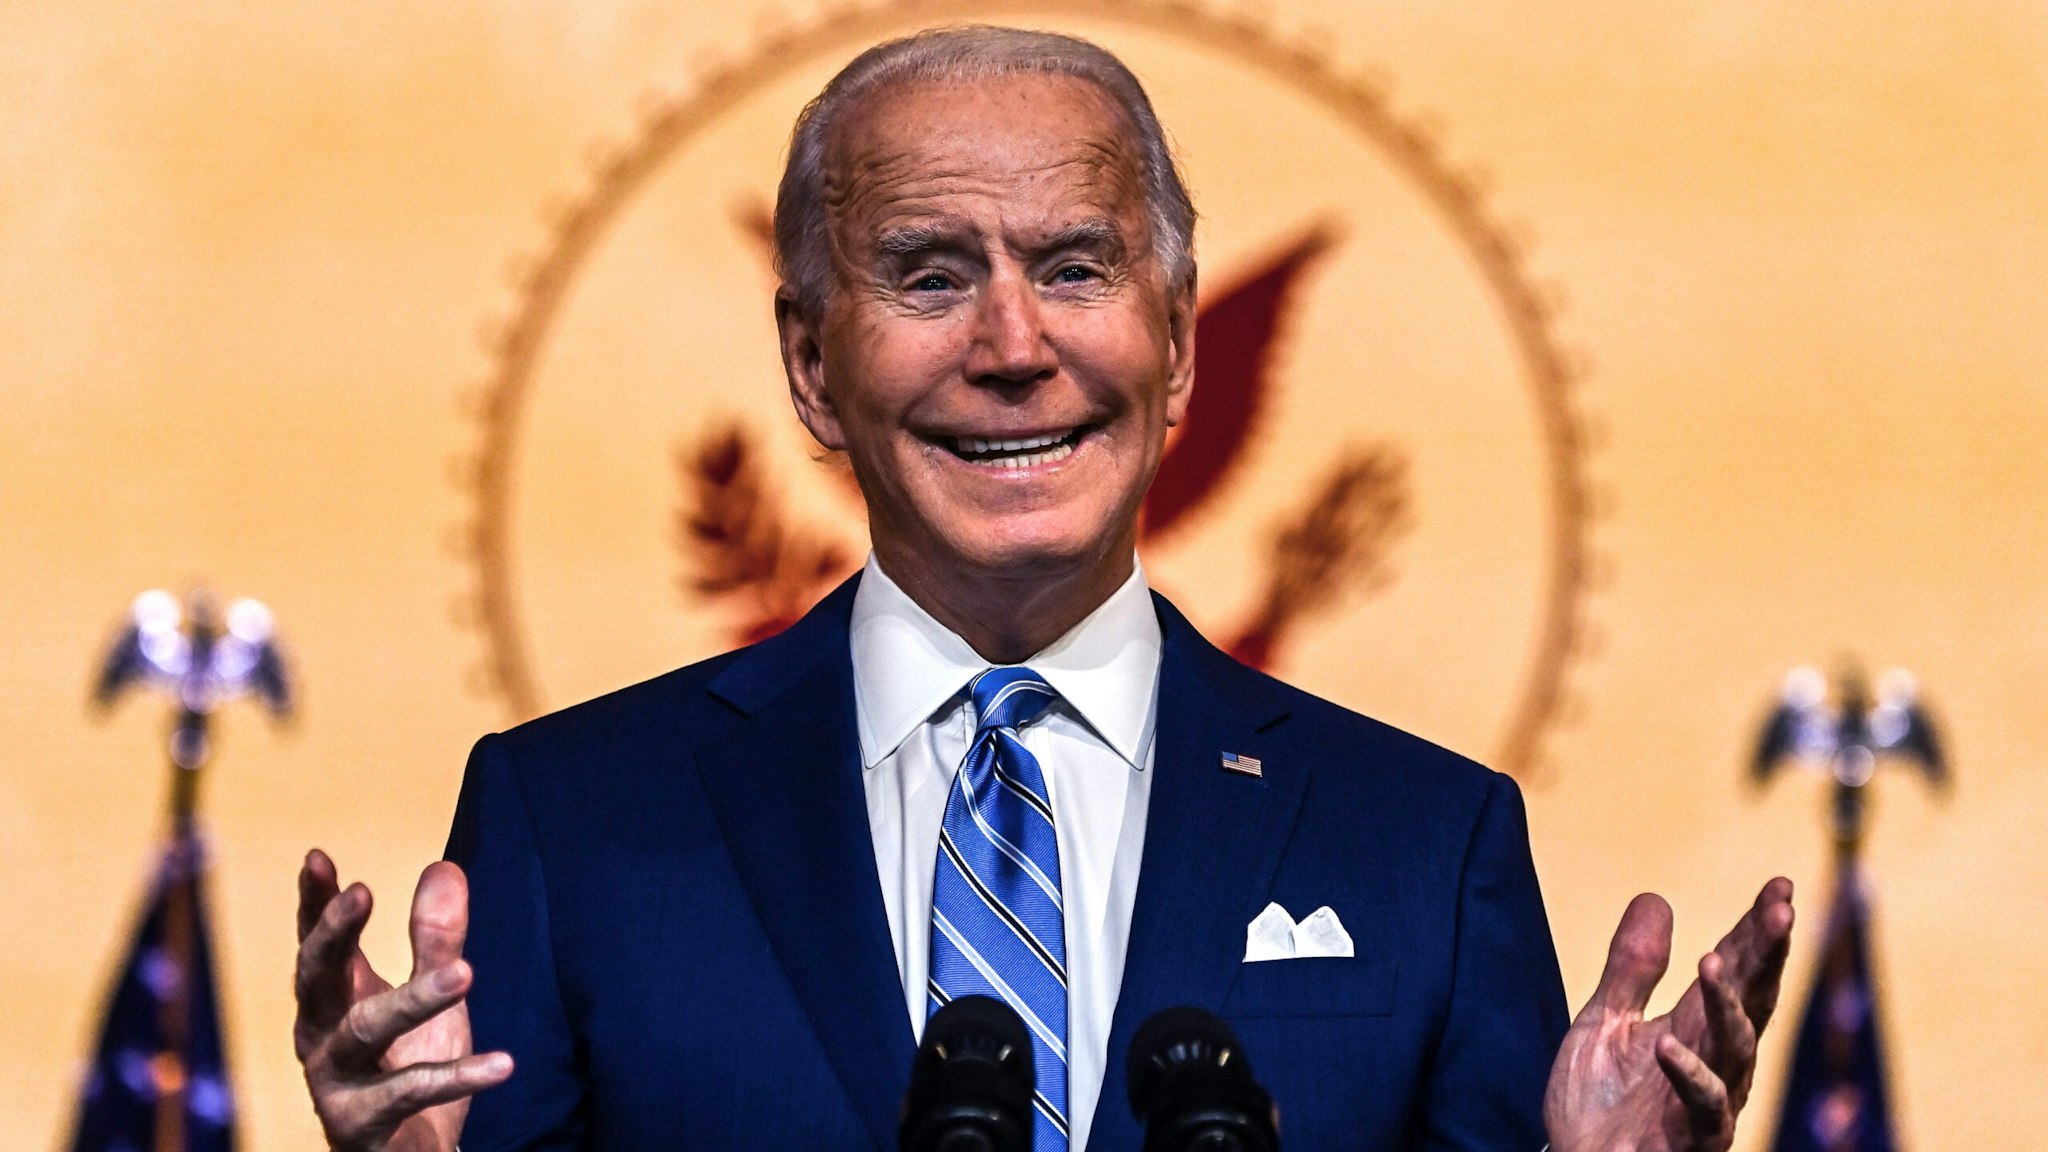 US President-elect Joe Biden delivers a Thanksgiving address at the Queen Theatre in Wilmington, Delaware, on November 25, 2020. - Biden called for an end to the "grim season of division" in the holiday speech . "I believe that this grim season of division, demonization is going to give way to a year of light," Biden said.